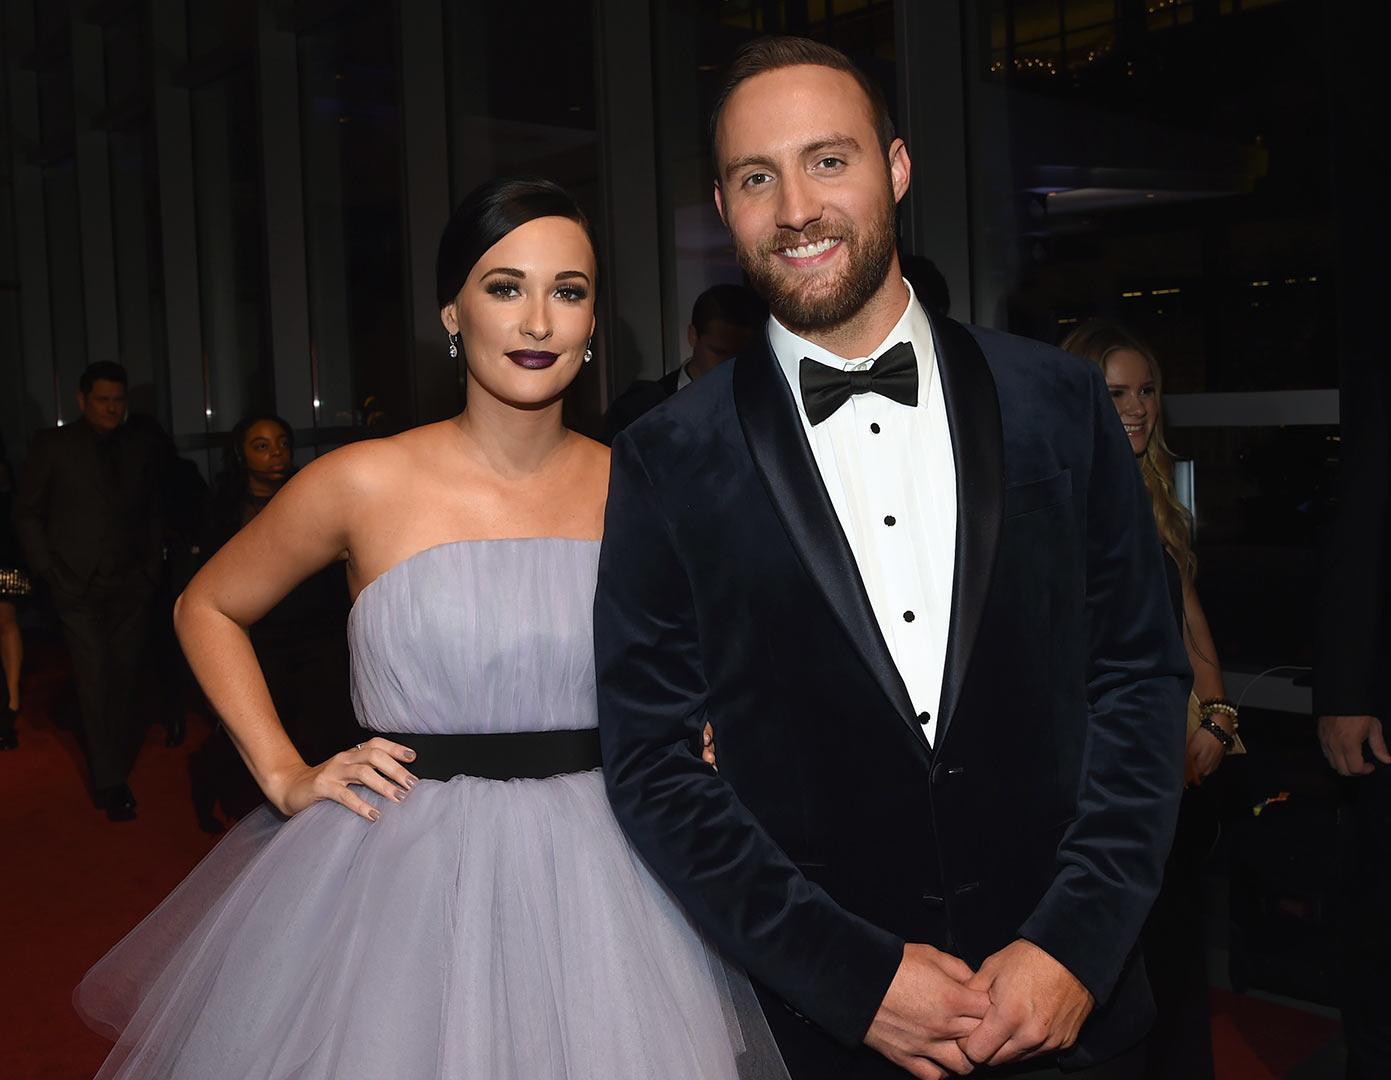 Kacey Musgraves Engaged to Ruston Kelly: Ring Pic, Cute Details